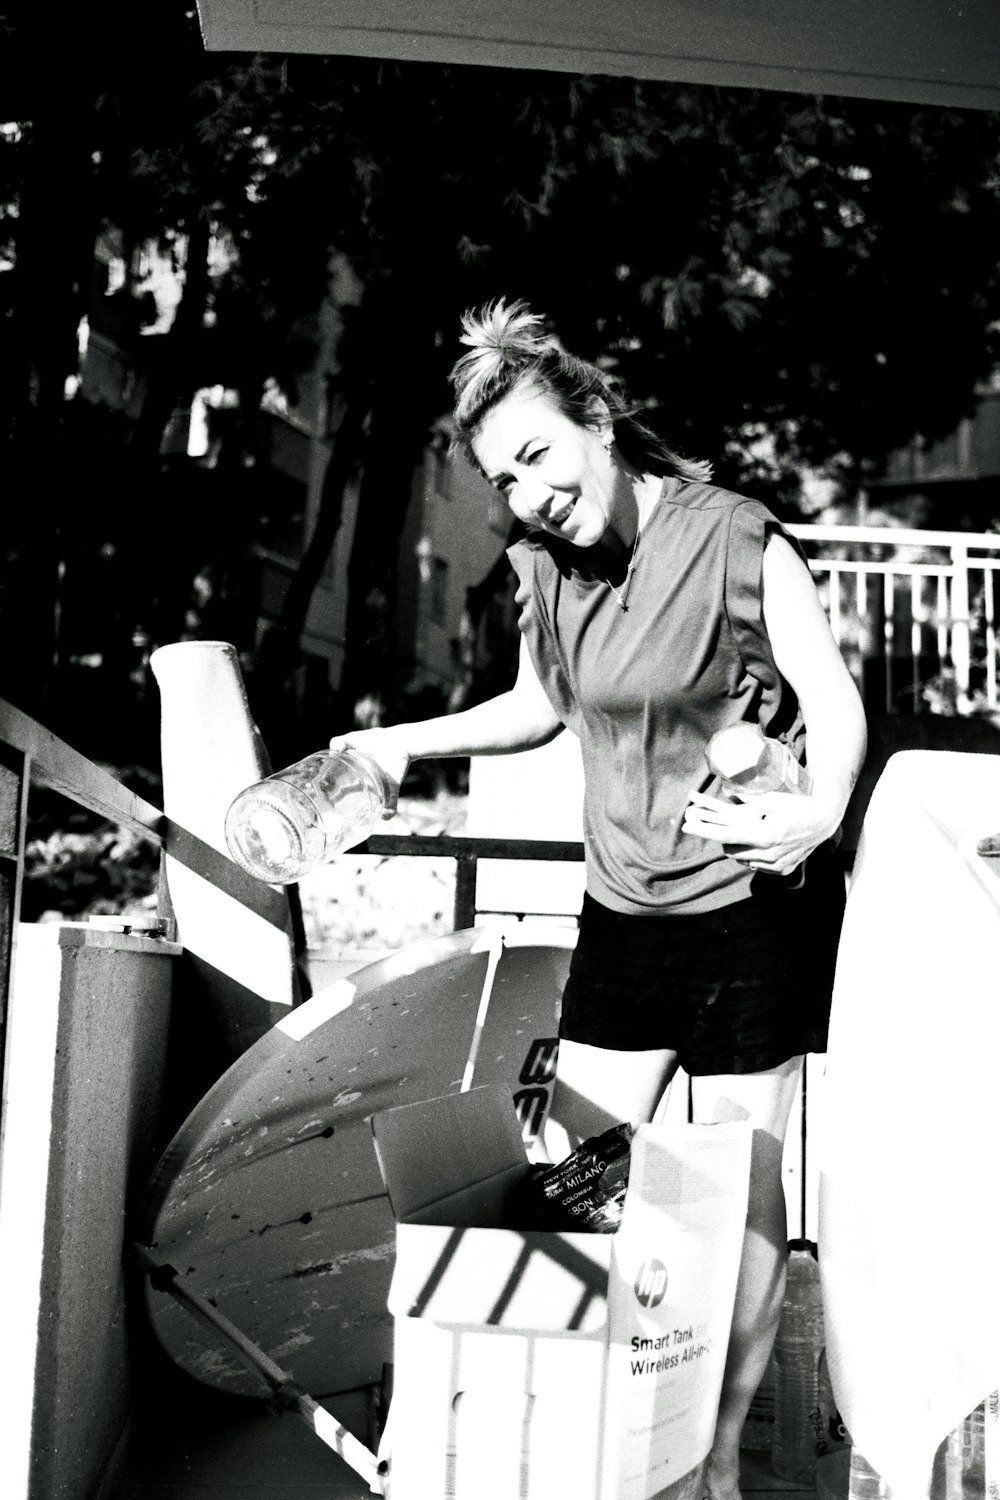 a black and white photo of a woman holding a surfboard